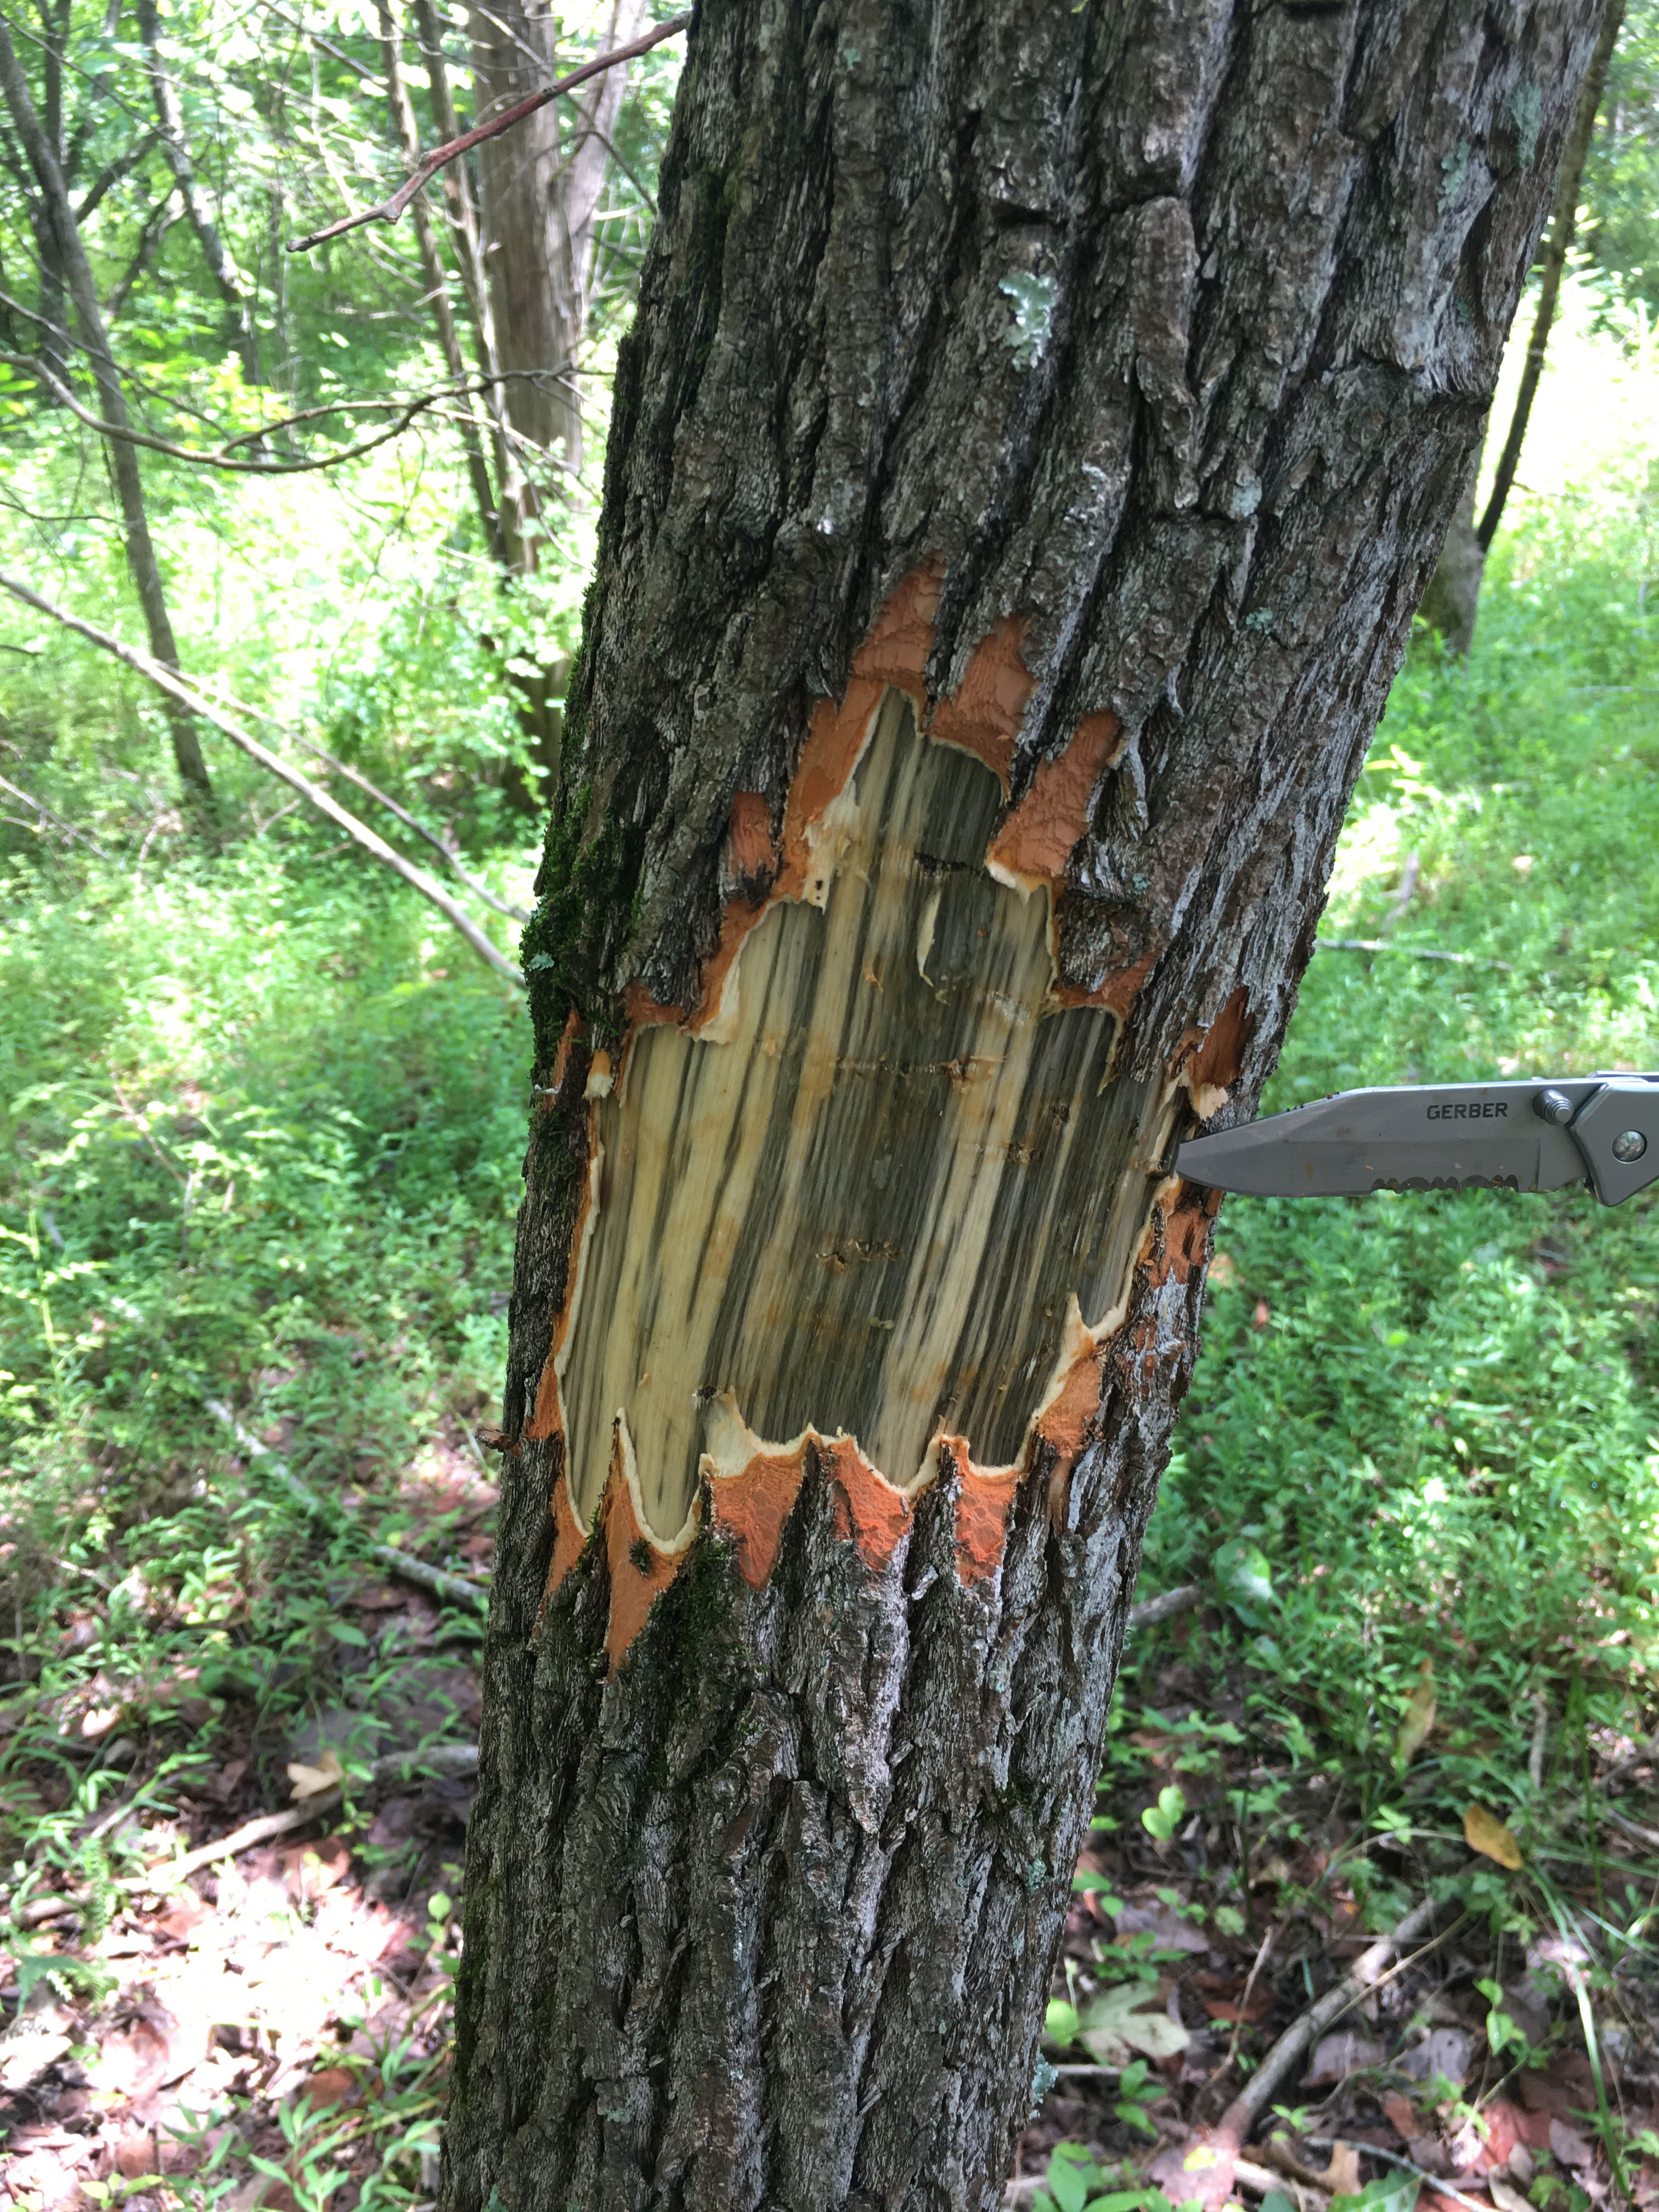 Black streaks under the bark of a sassafras tree are an indication of the presence of laural wilt disease. Photo by Abe Nielsen, Ky. Division of Forestry